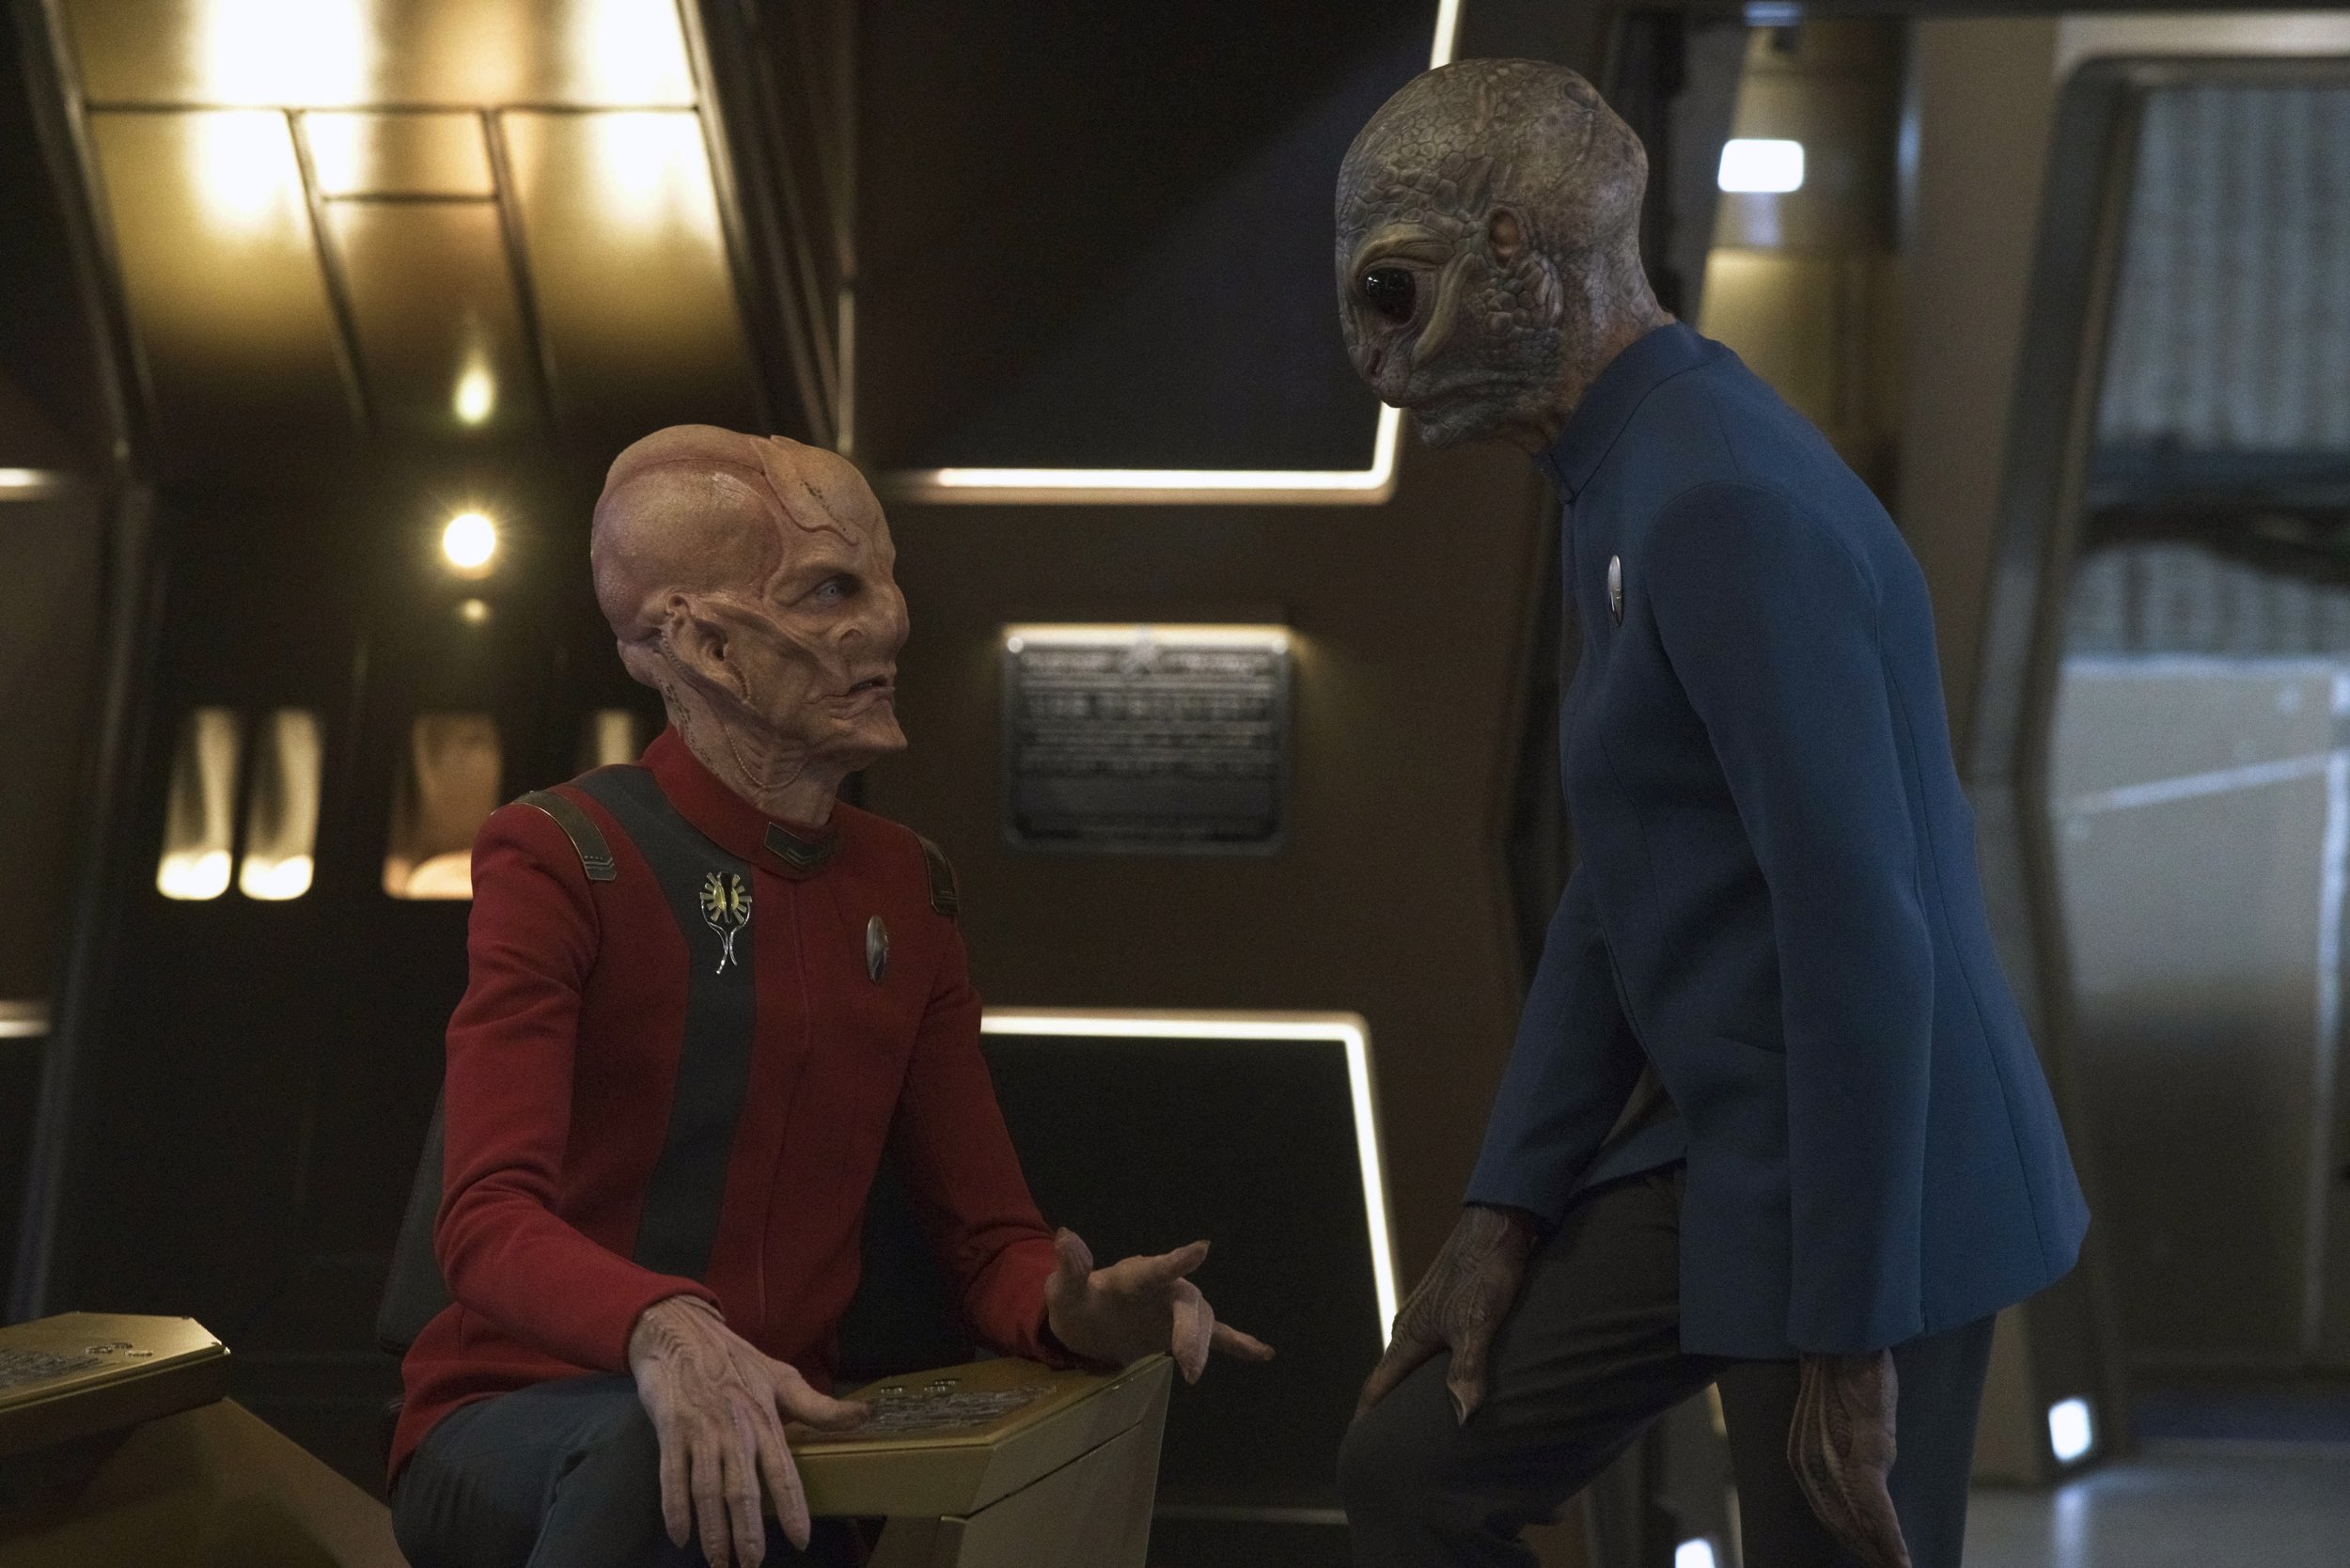   Pictured: Doug Jones as Saru and David Benjamin Tomlinson as Linus of the Paramount+ original series STAR TREK: DISCOVERY. Photo Cr: Michael Gibson/Paramount+ (C) 2021 CBS Interactive. All Rights Reserved.  